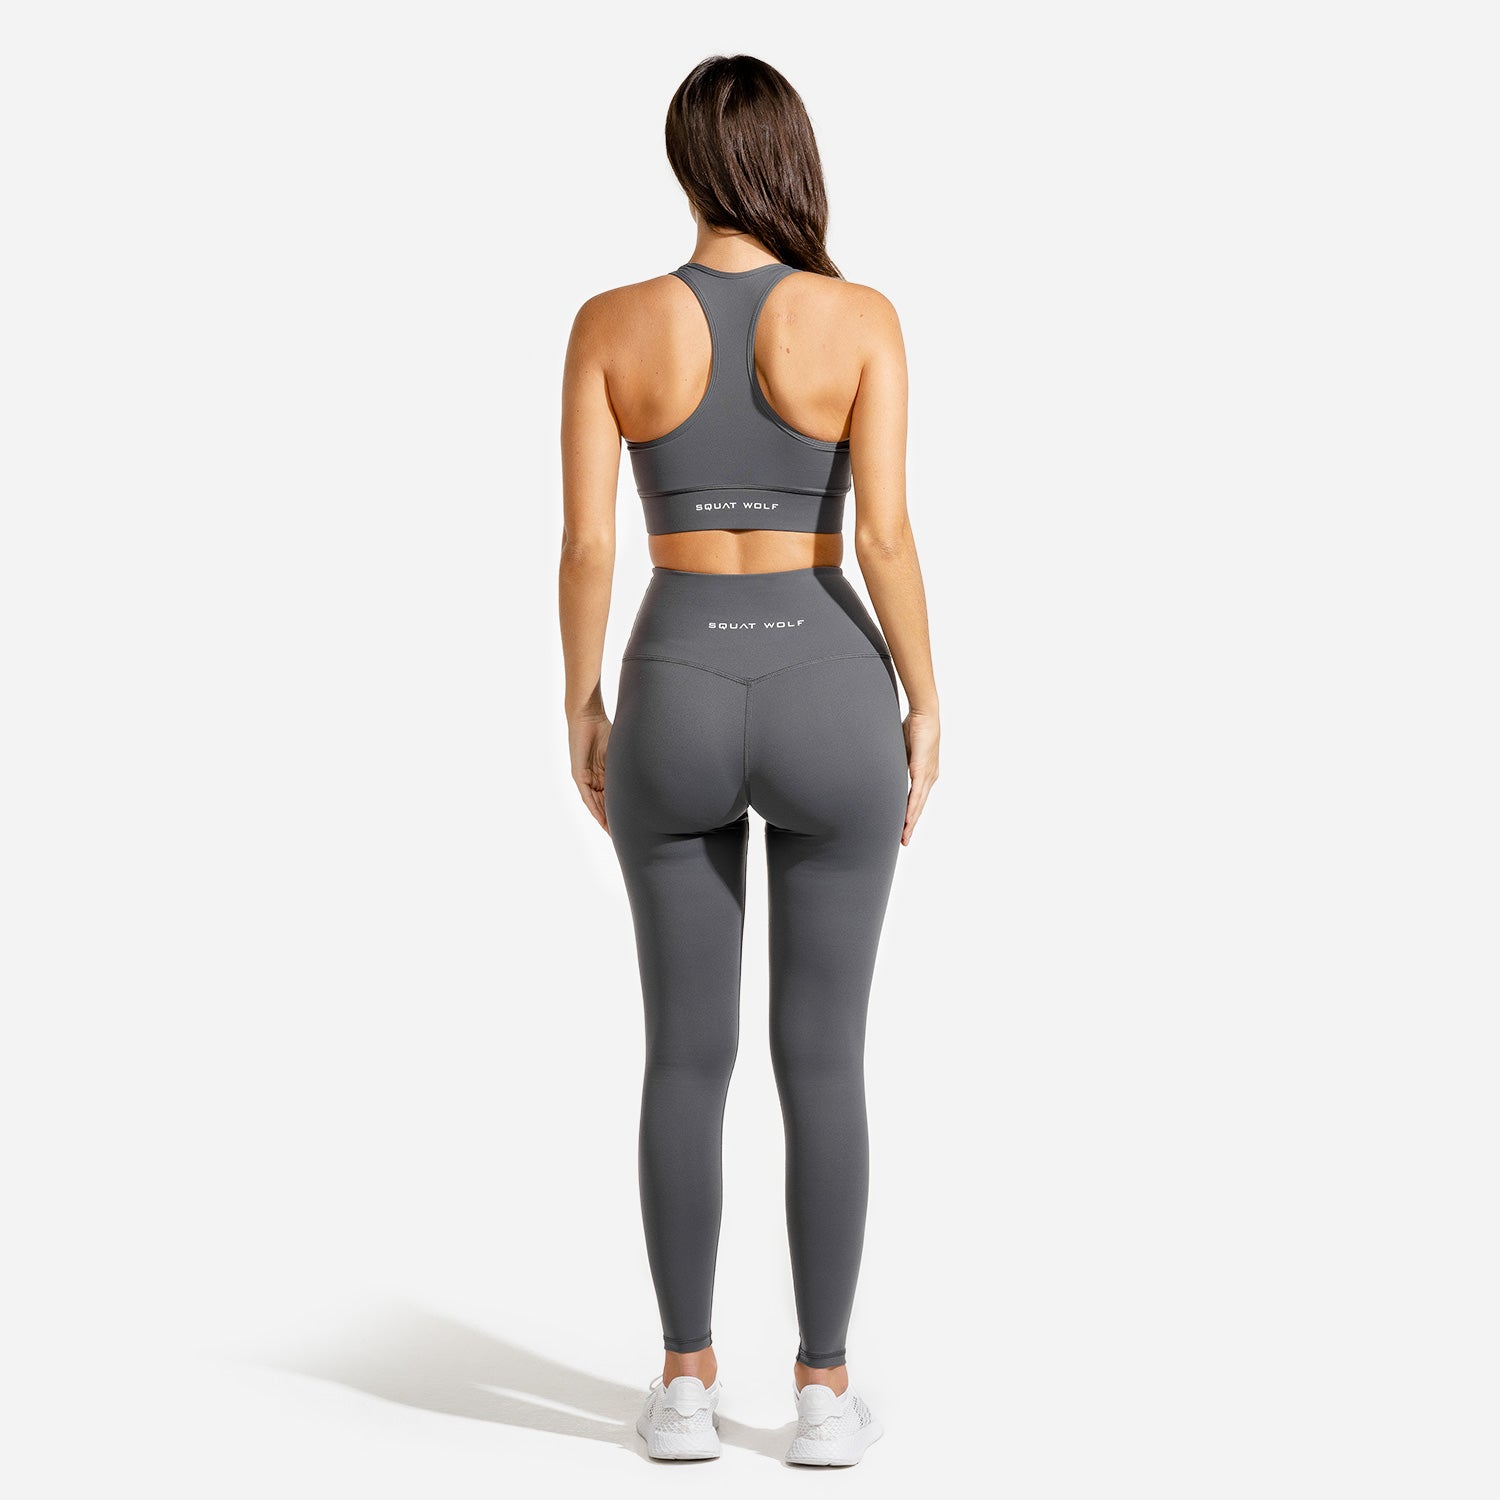 squatwolf-workout-clothes-hera-performance-bra-charcoal-sports-bra-for-gym